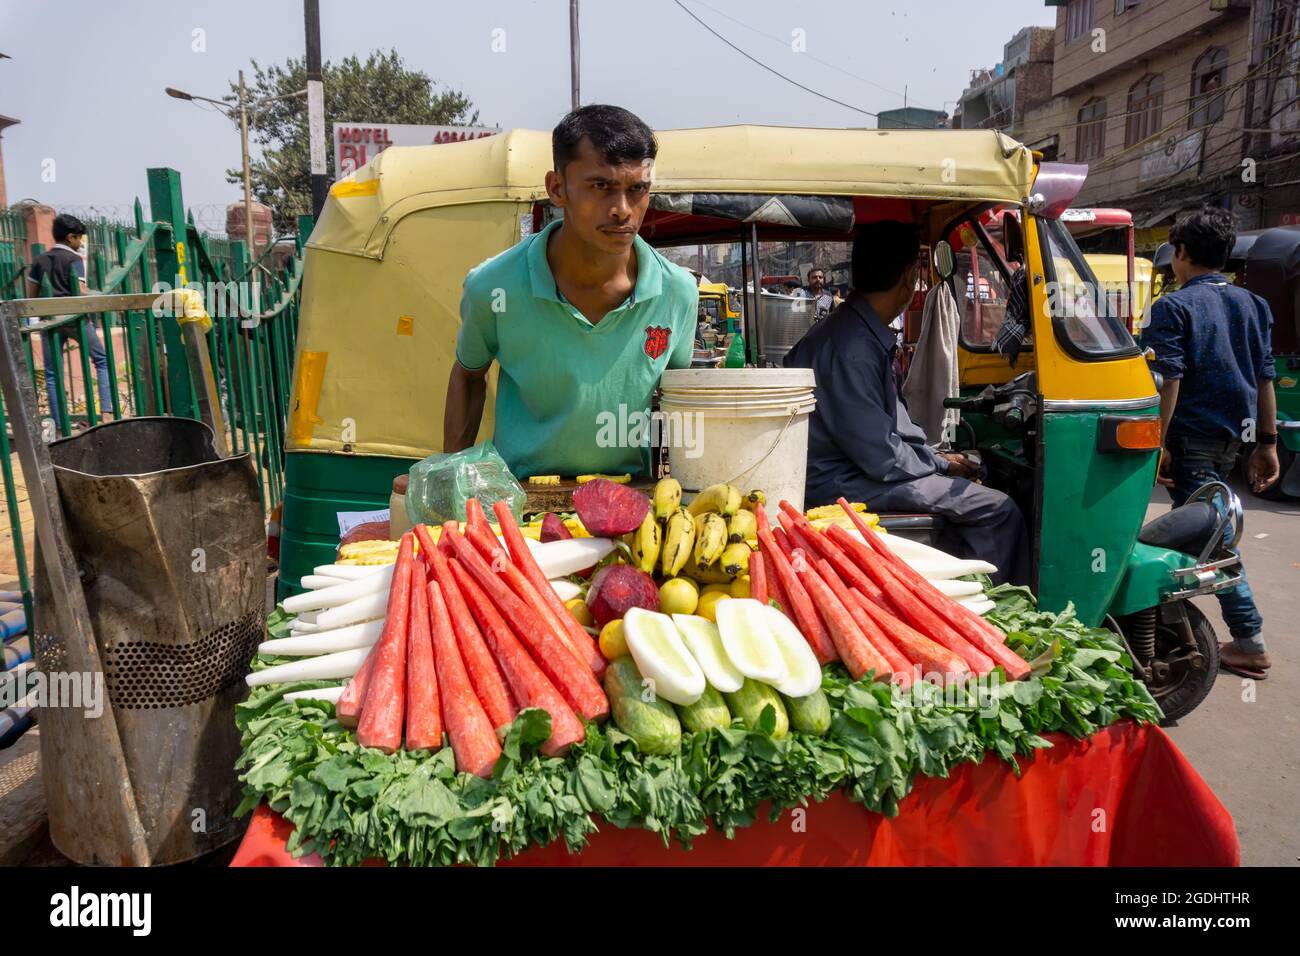 Old Delhi, India - March 4, 2018: Fresh fruits and vegetable vendor near the Chandni Chowk (Moonlight Square), one of the oldest and busiest markets i Stock Photo